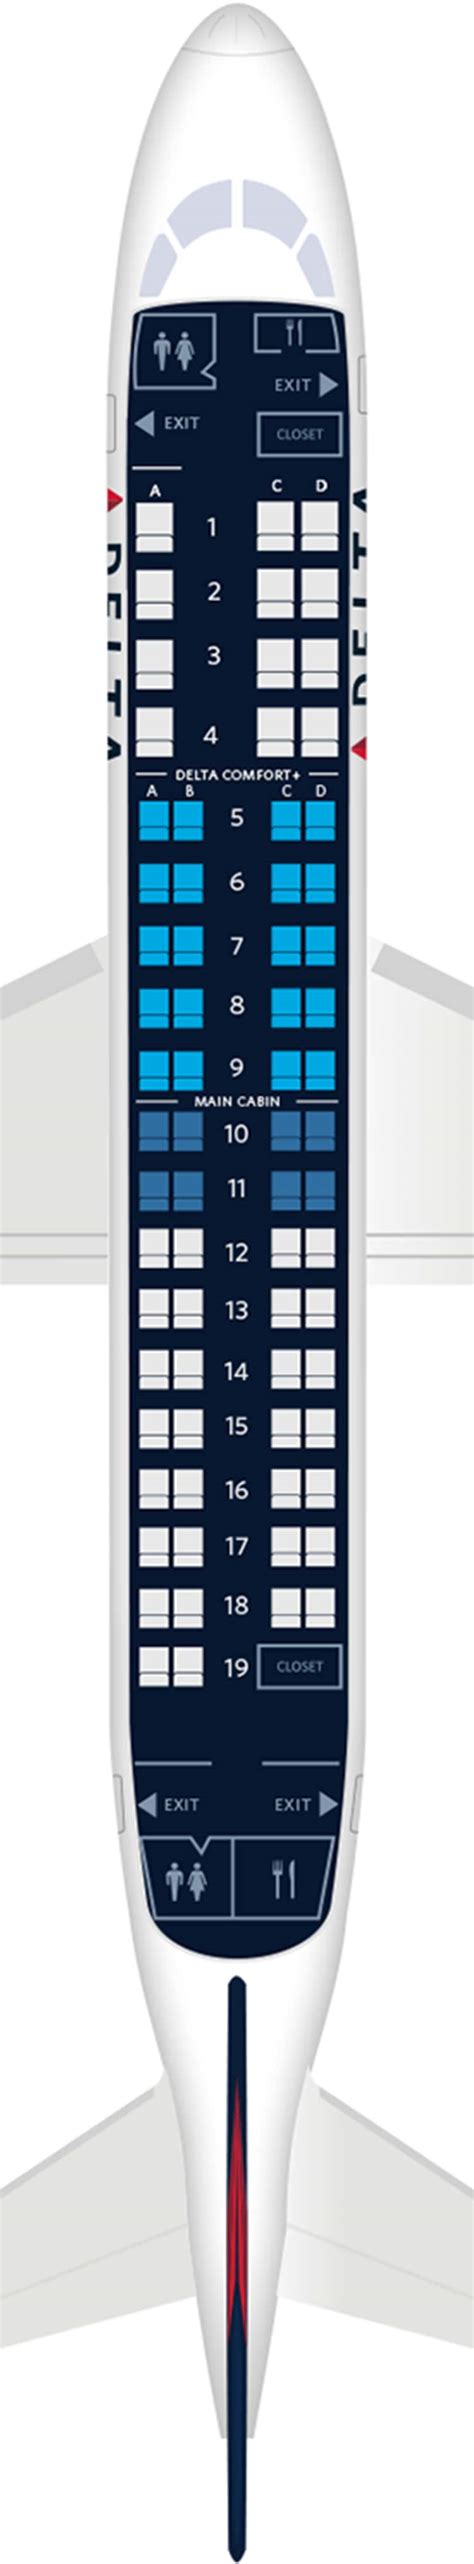 Embraer 175 seating map. Seat Width: The distance between the inner sides of the armrests on a seat. Seat Recline: The distance between a seat back in its full upright and full recline position. View Embraer EMB 175 seating and specifications on United aircraft using this United Airlines seating chart. 